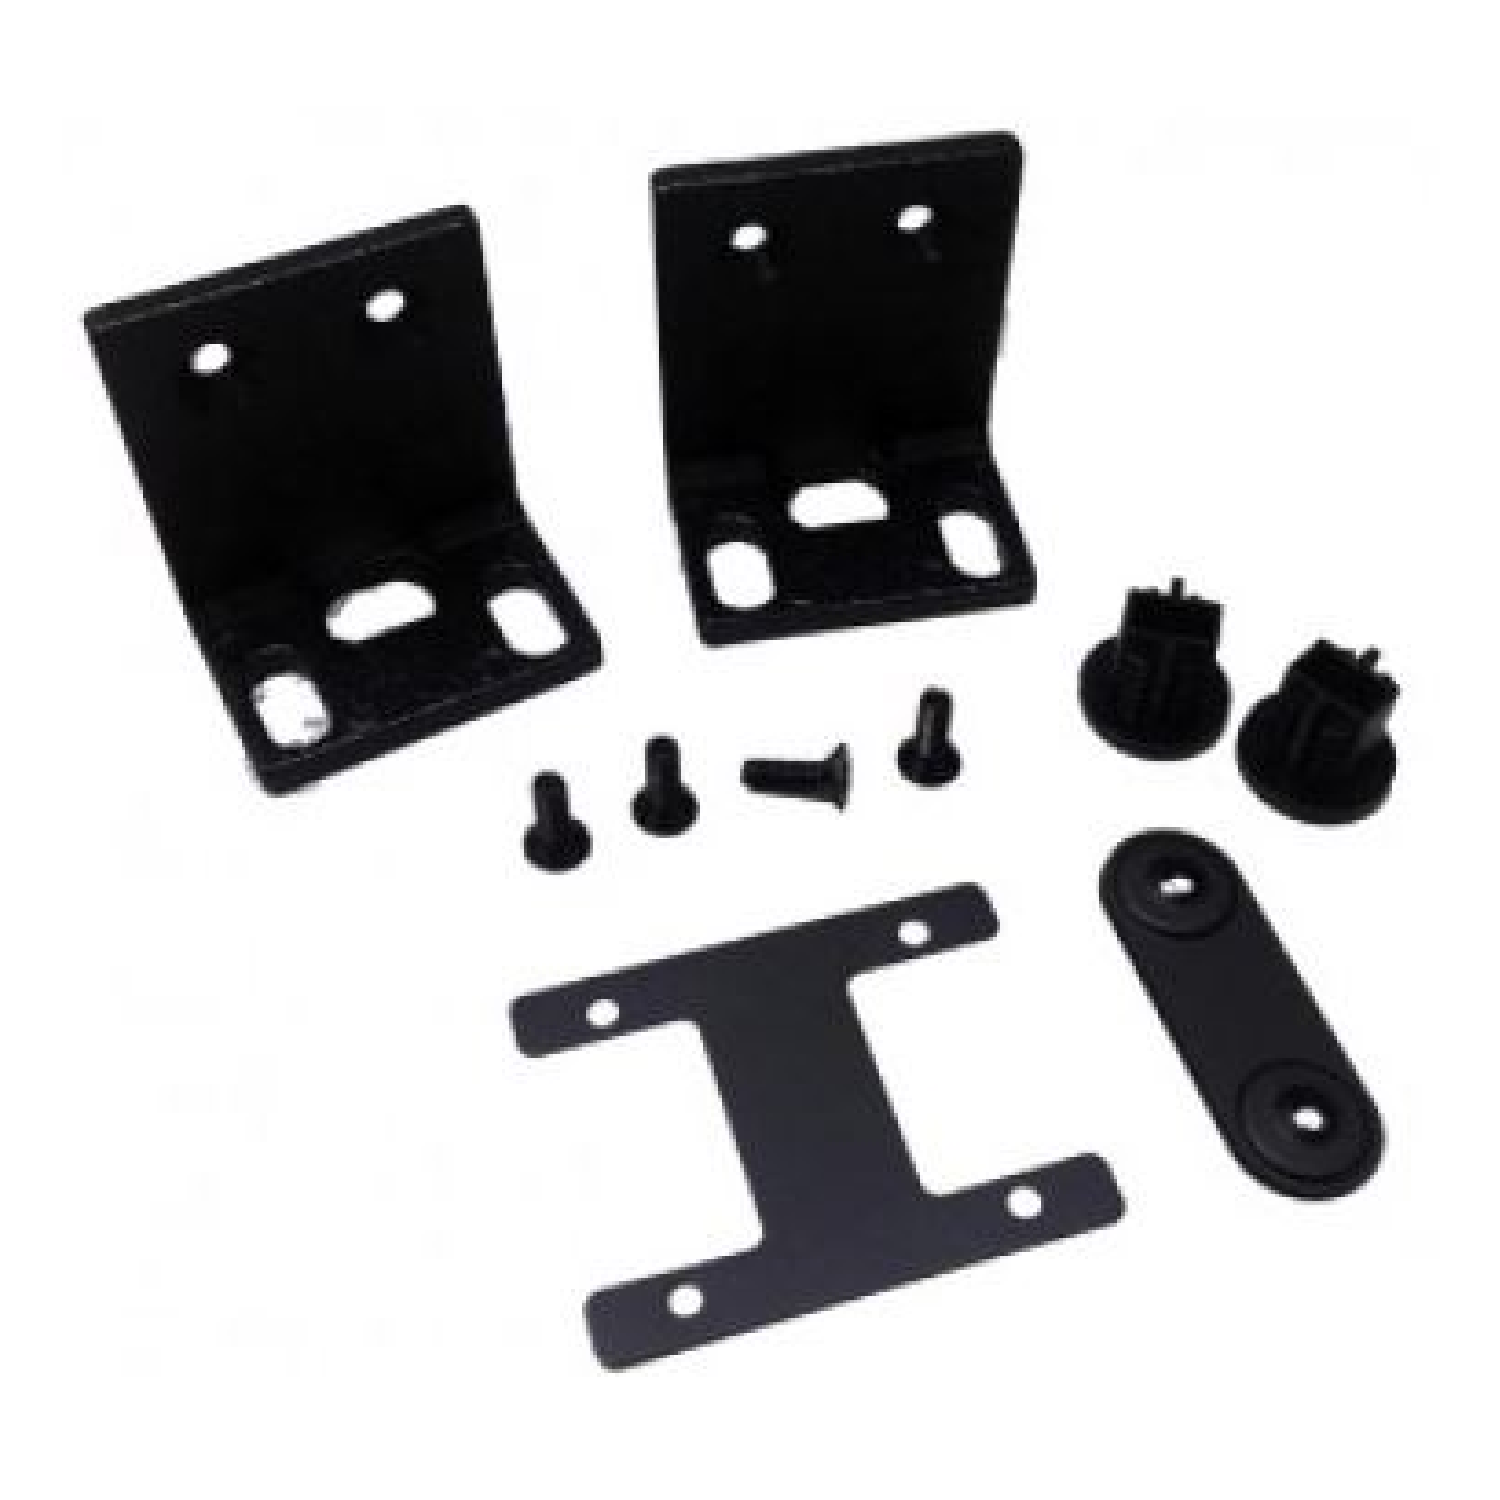 Steel Rackmount Kit for a Dual Half Rack or 1 Rack Act Series Receivers   FB 72 mipro